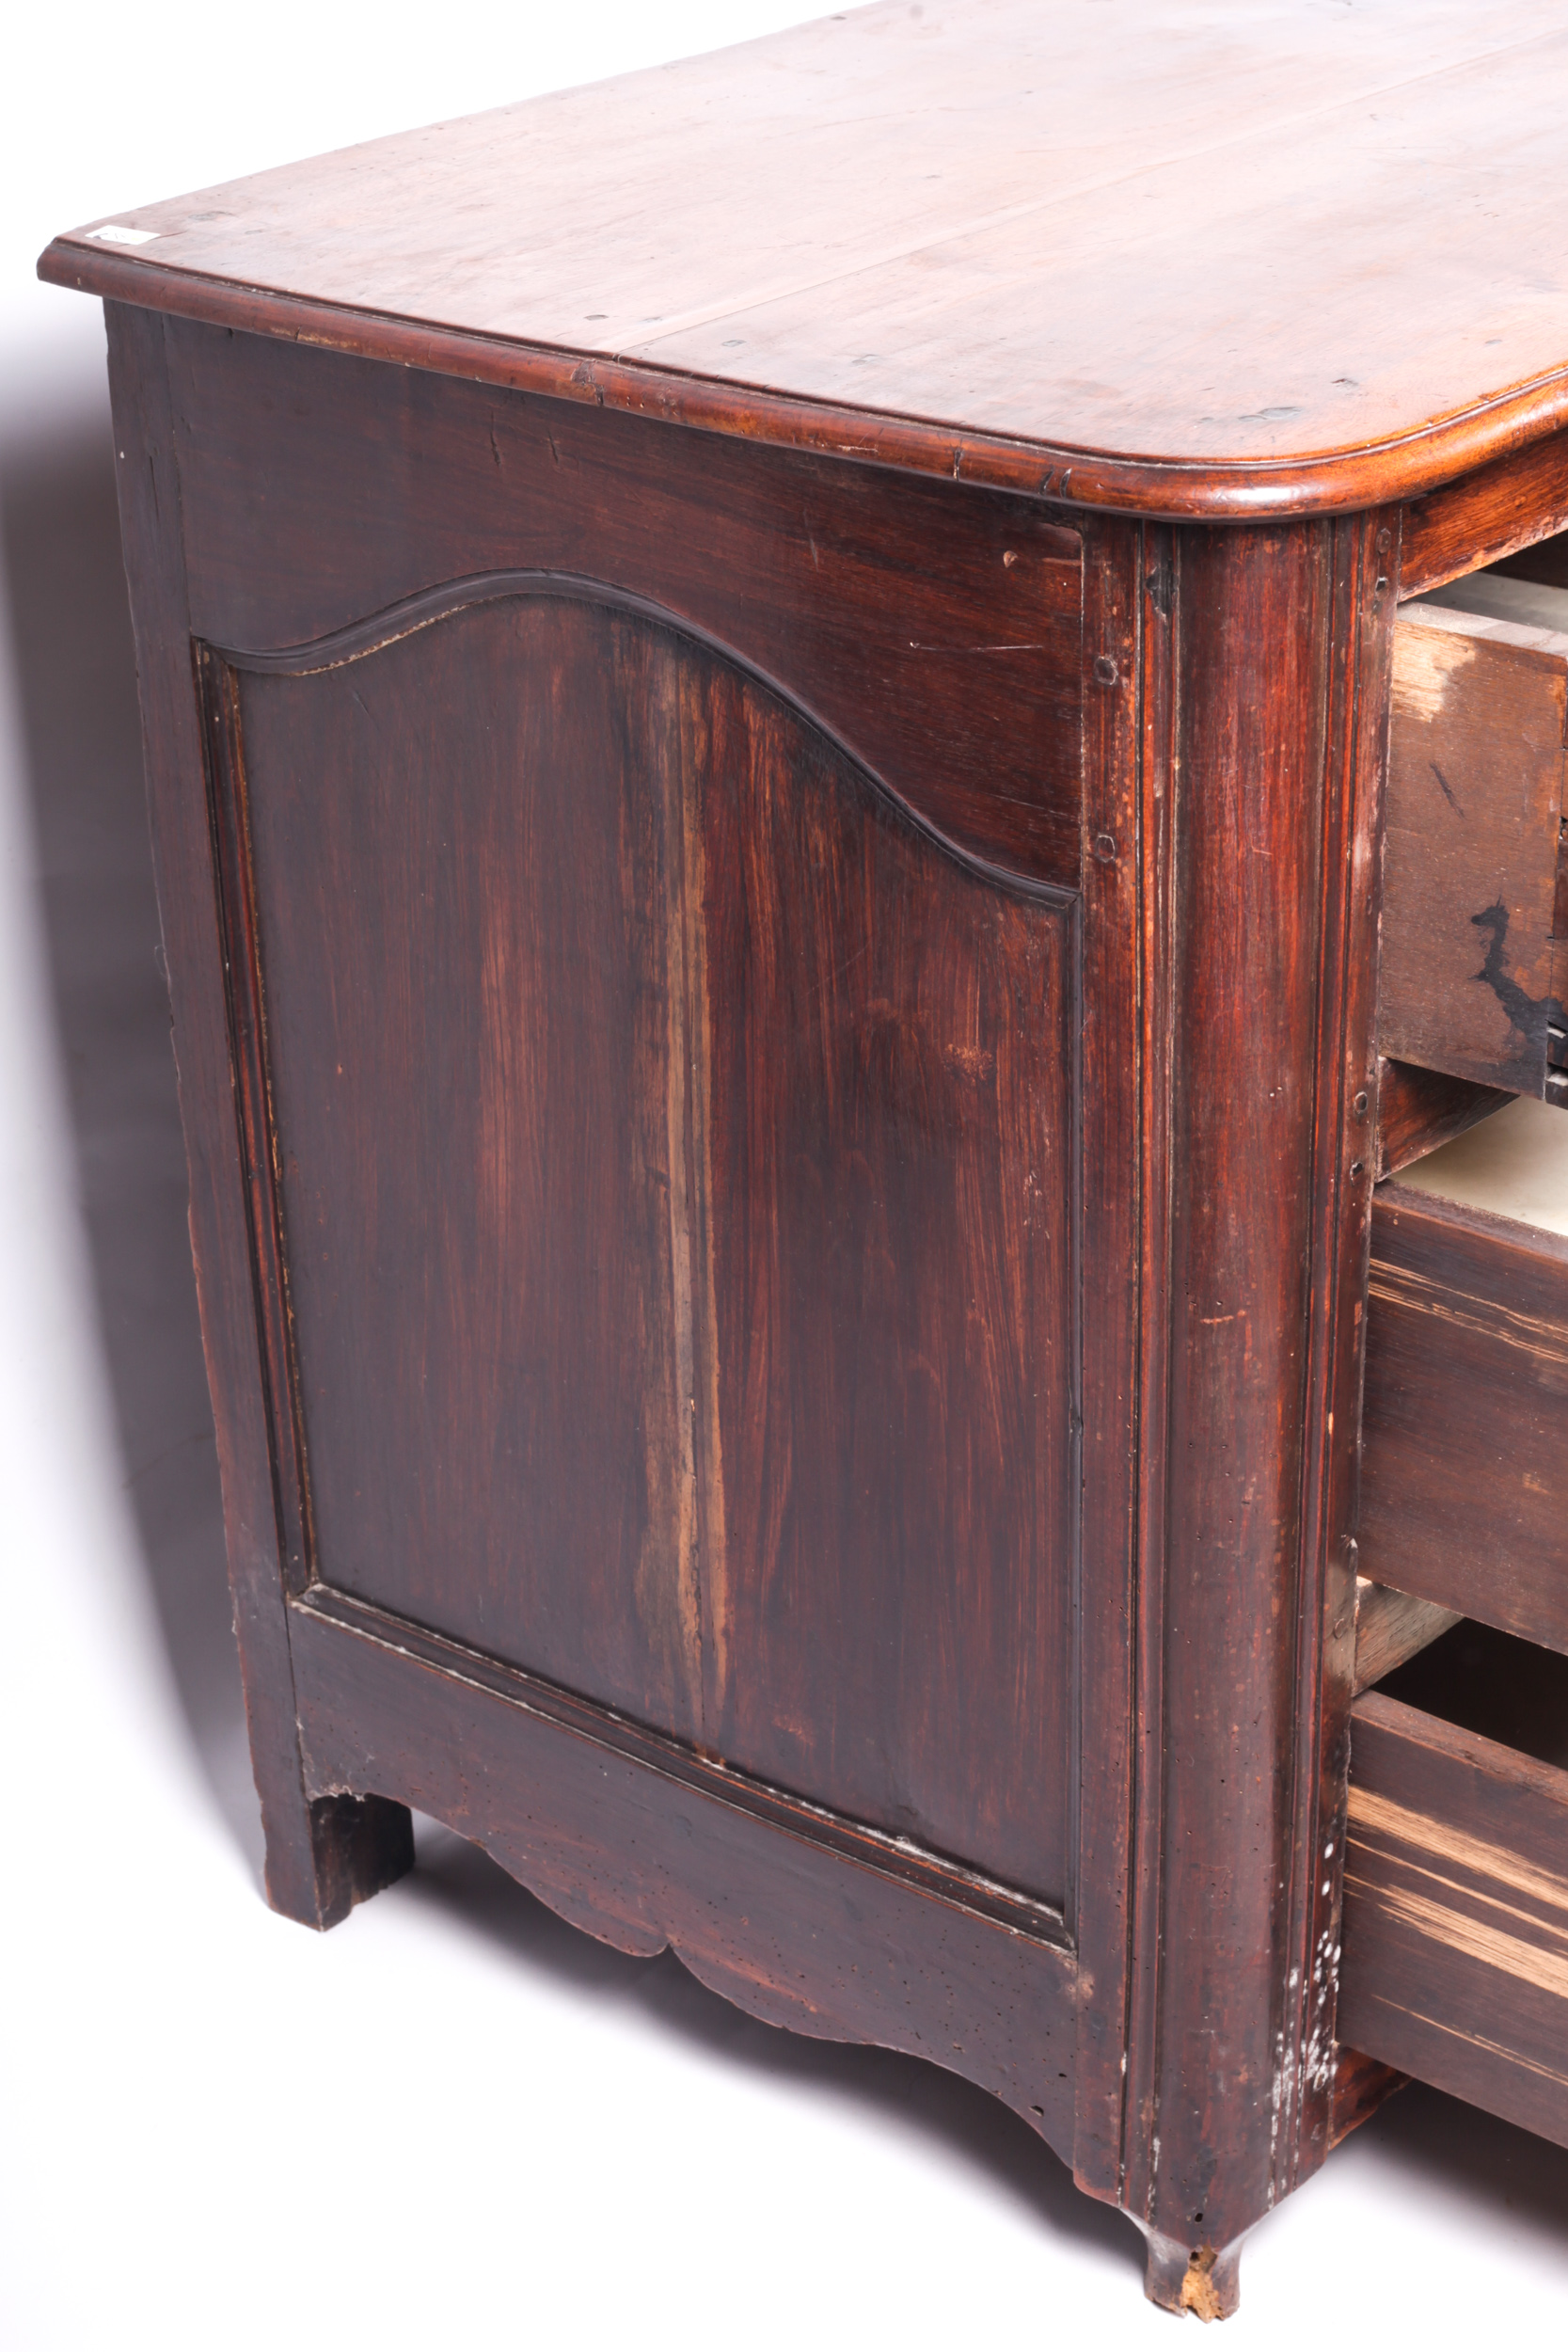 A 17th/18th century Continental walnut chest of drawers. - Image 2 of 5